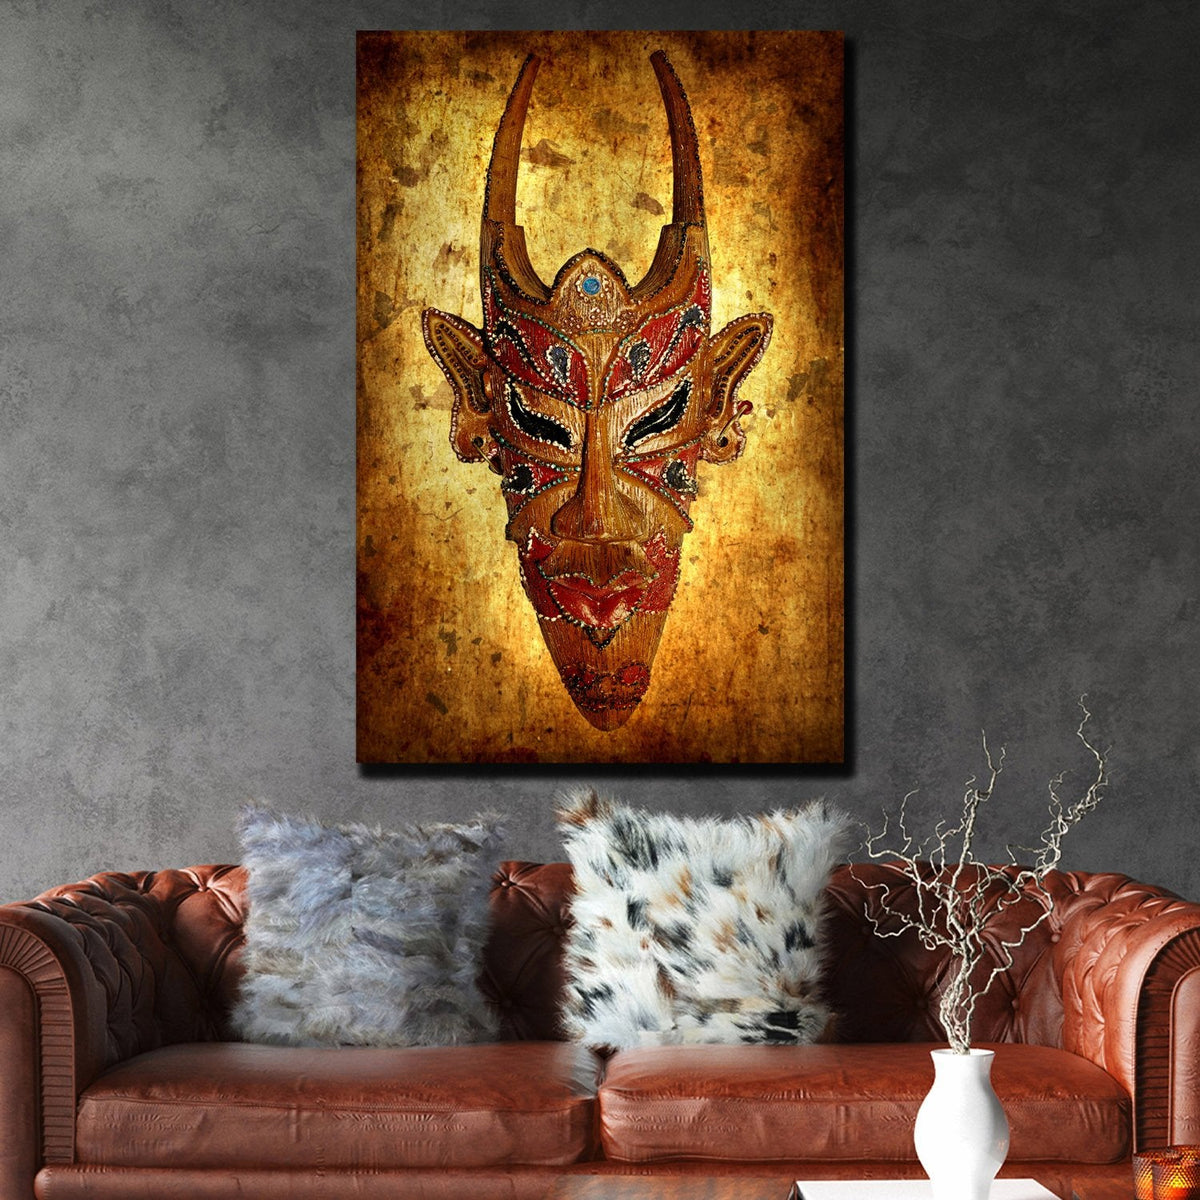 https://cdn.shopify.com/s/files/1/0387/9986/8044/products/AfricanMaskCanvasPrintStretched-3.jpg